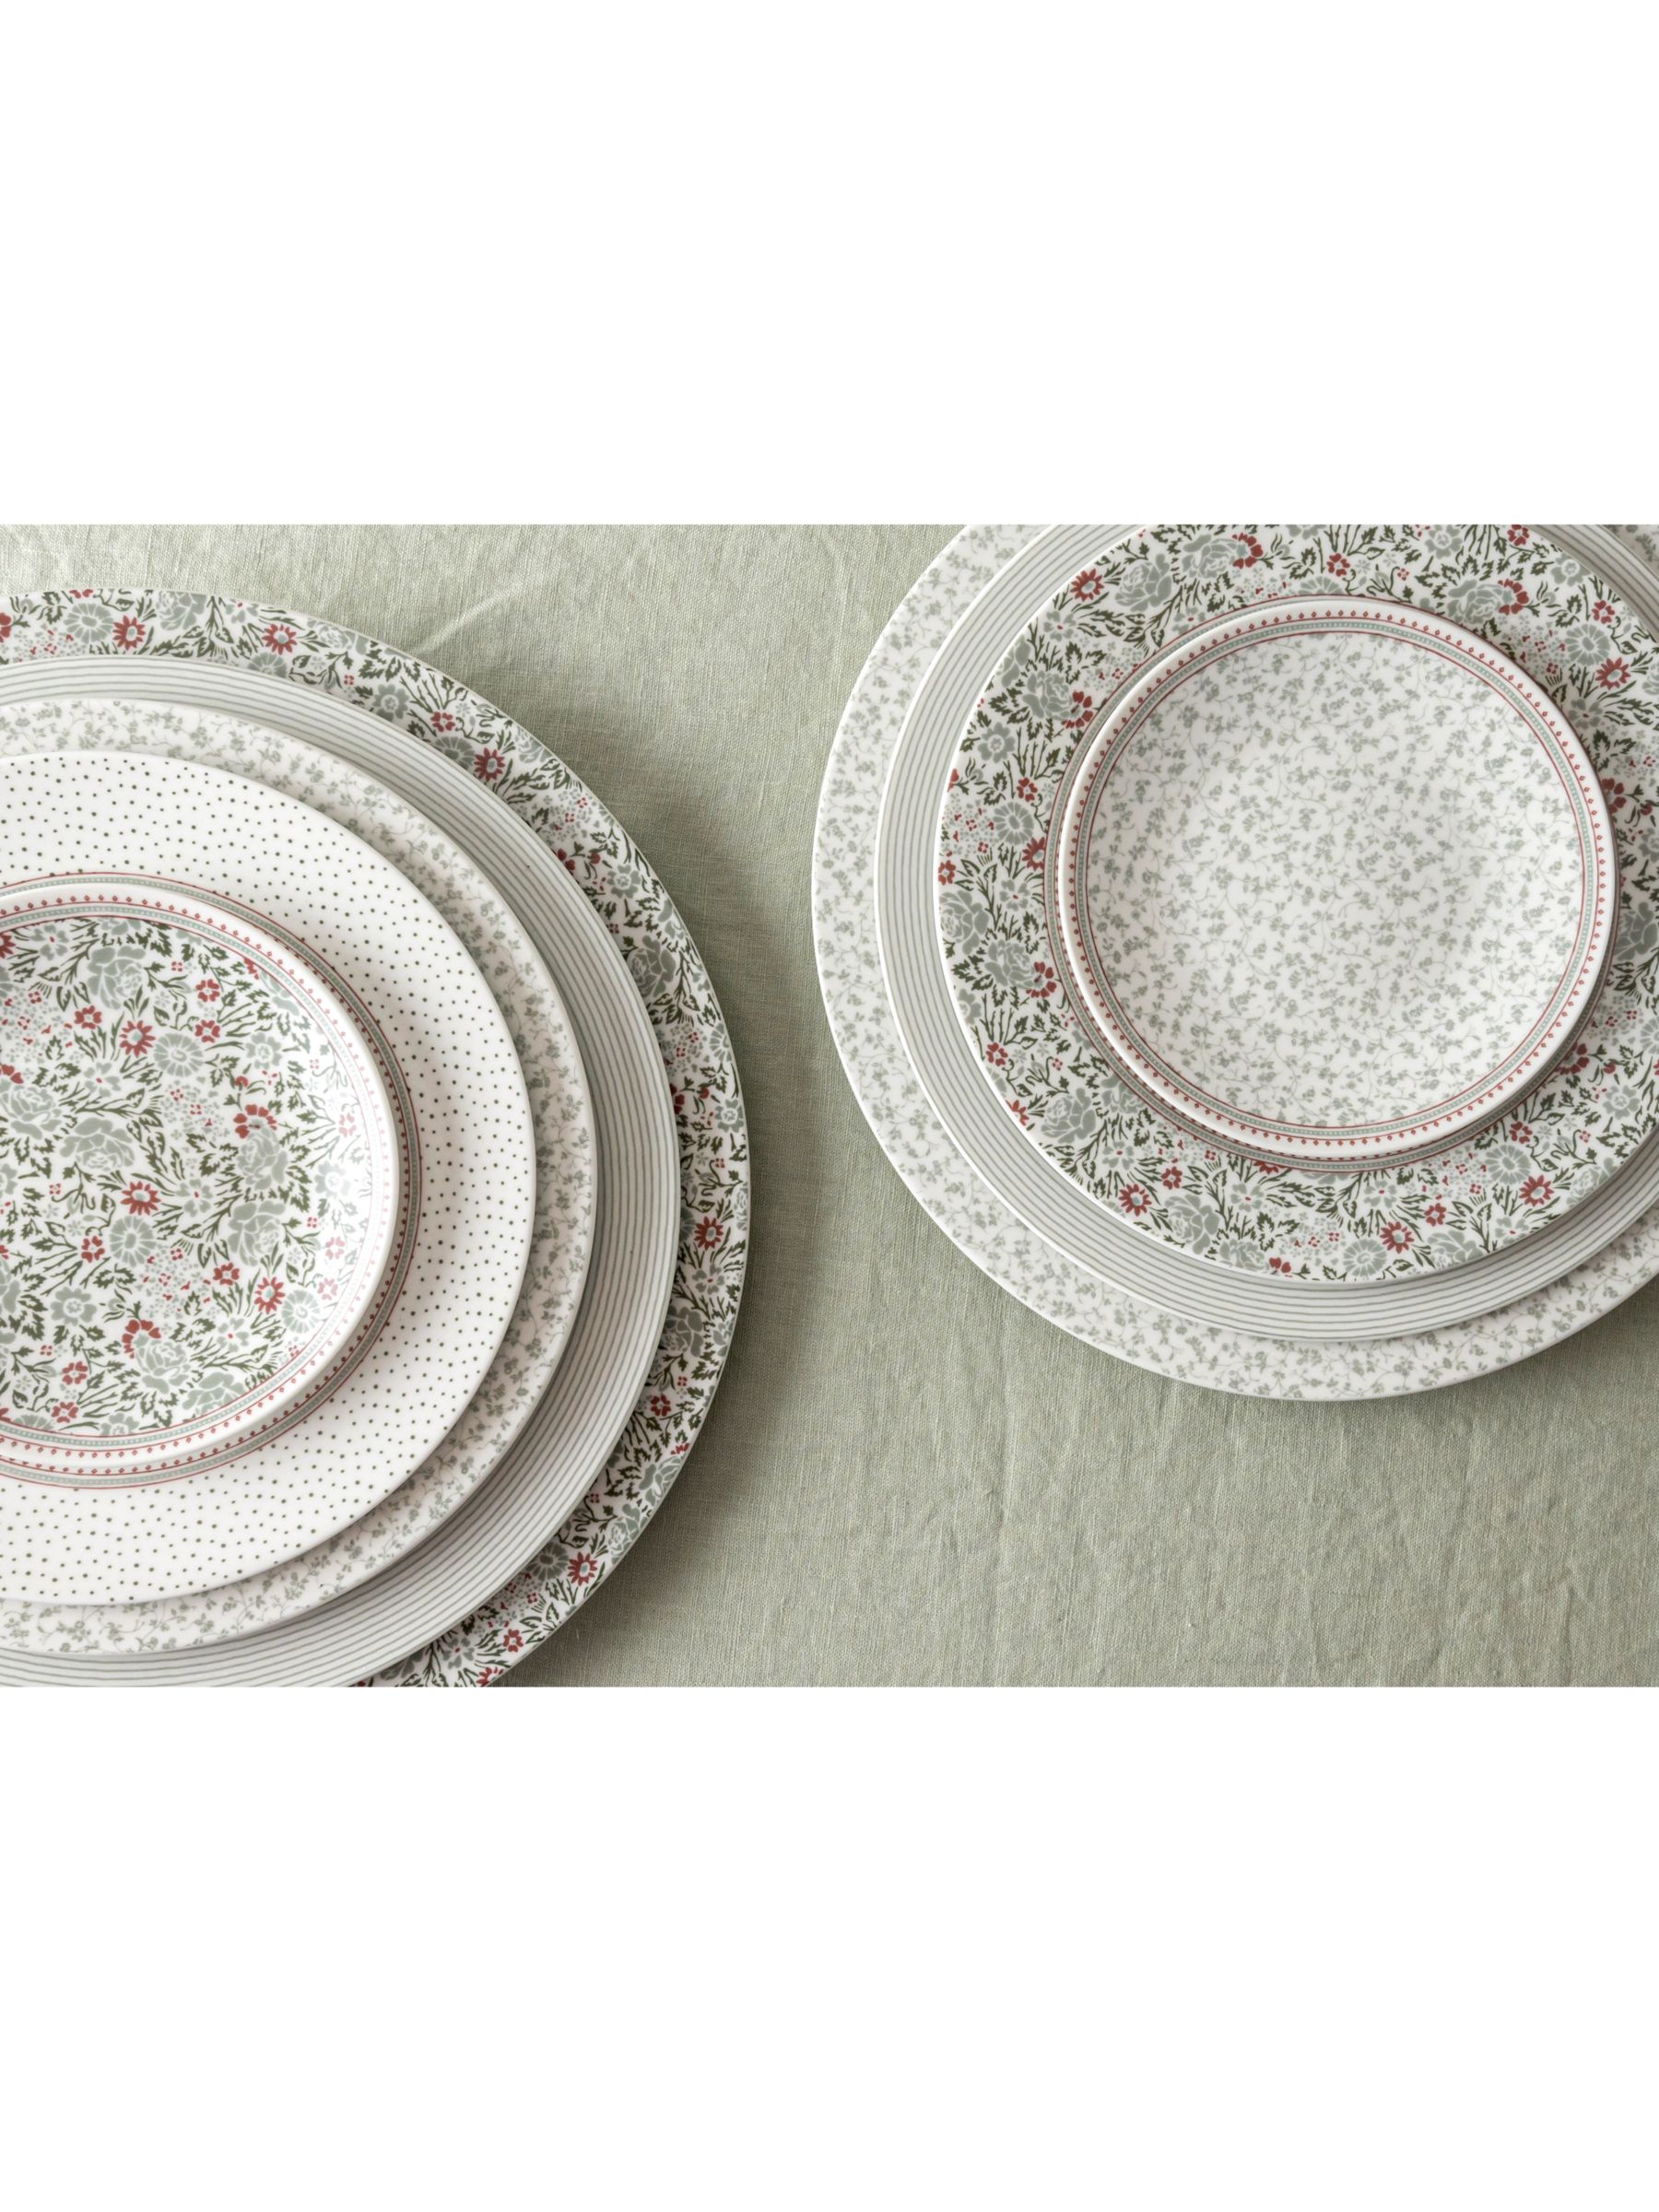 Laura Ashley Wild Plate, Collectables 4, White/Sage Clematis of 27.5cm, Set Dinner Green